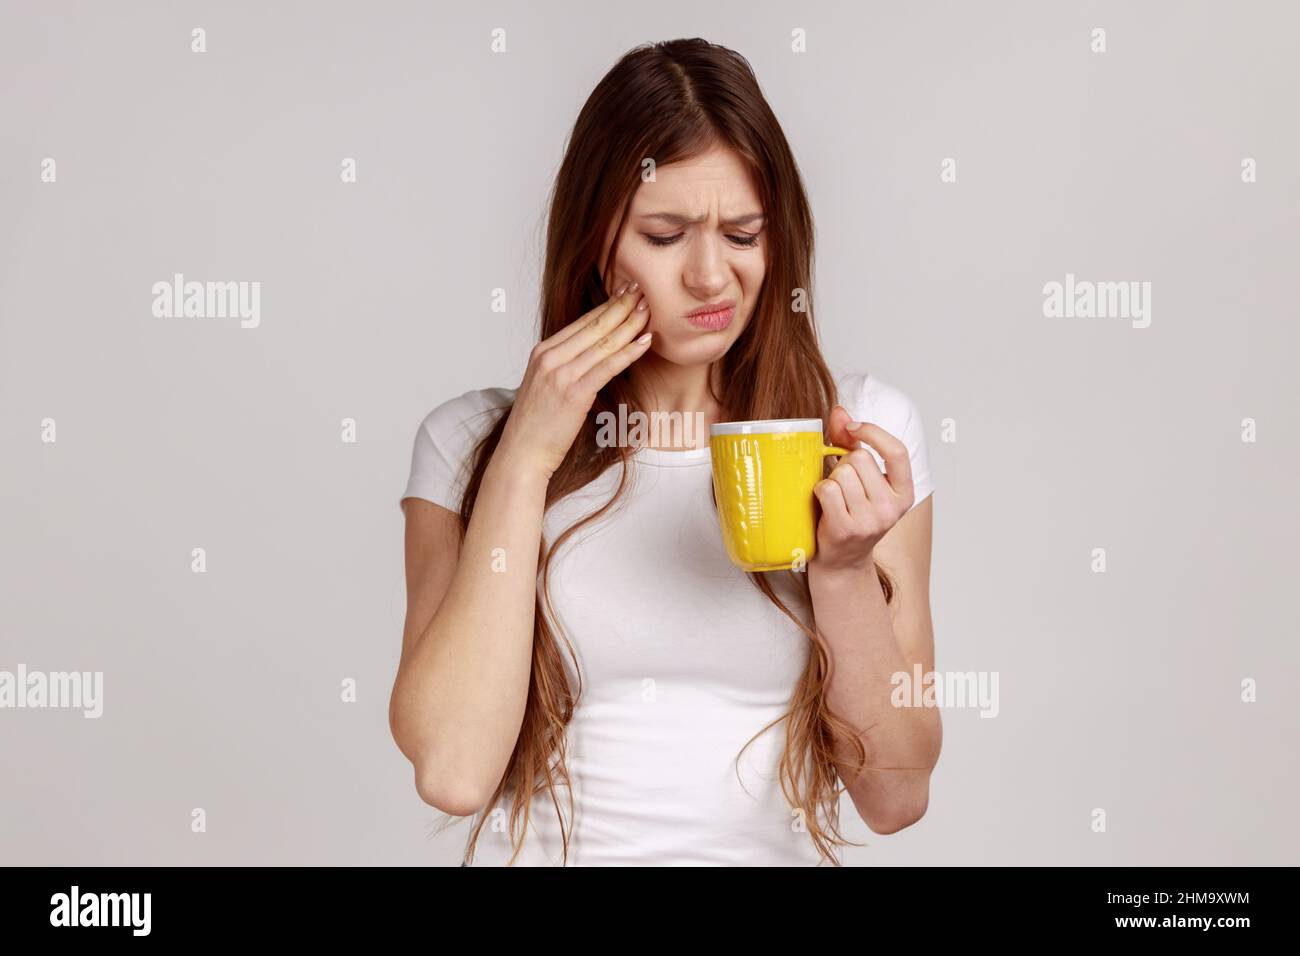 Sick unhealthy woman touching chin suffering tooth ache, has sensitive teeth, feels pain after drinking cold water, wearing white T-shirt. Indoor studio shot isolated on gray background. Stock Photo